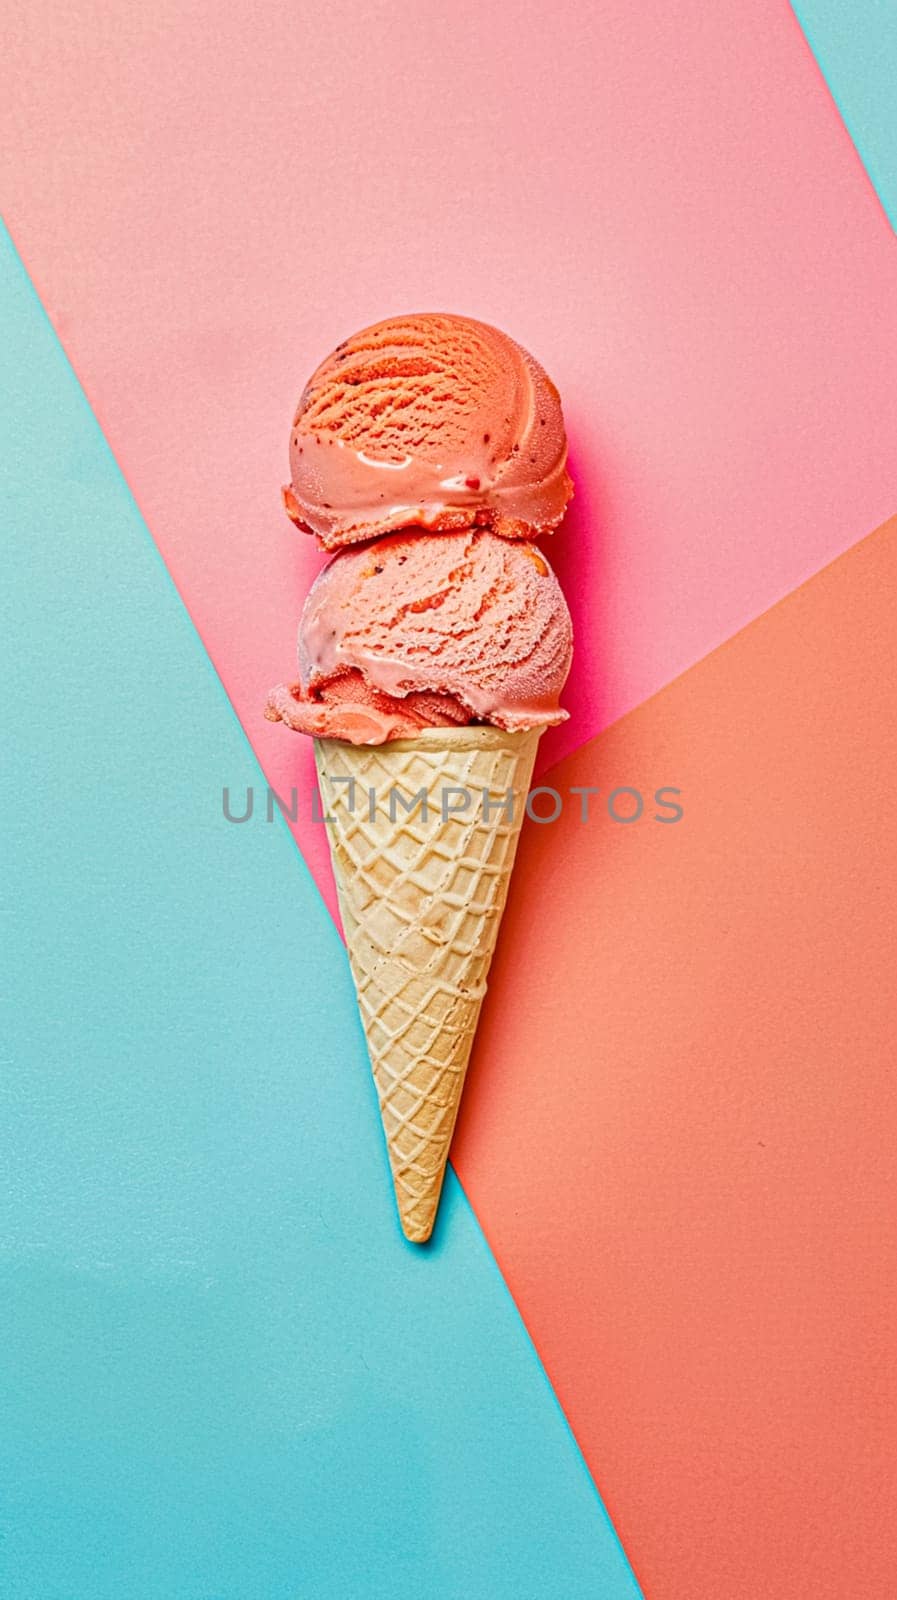 Ice cream colourful summer treat, sweet dessert in summertime, holiday food by Anneleven